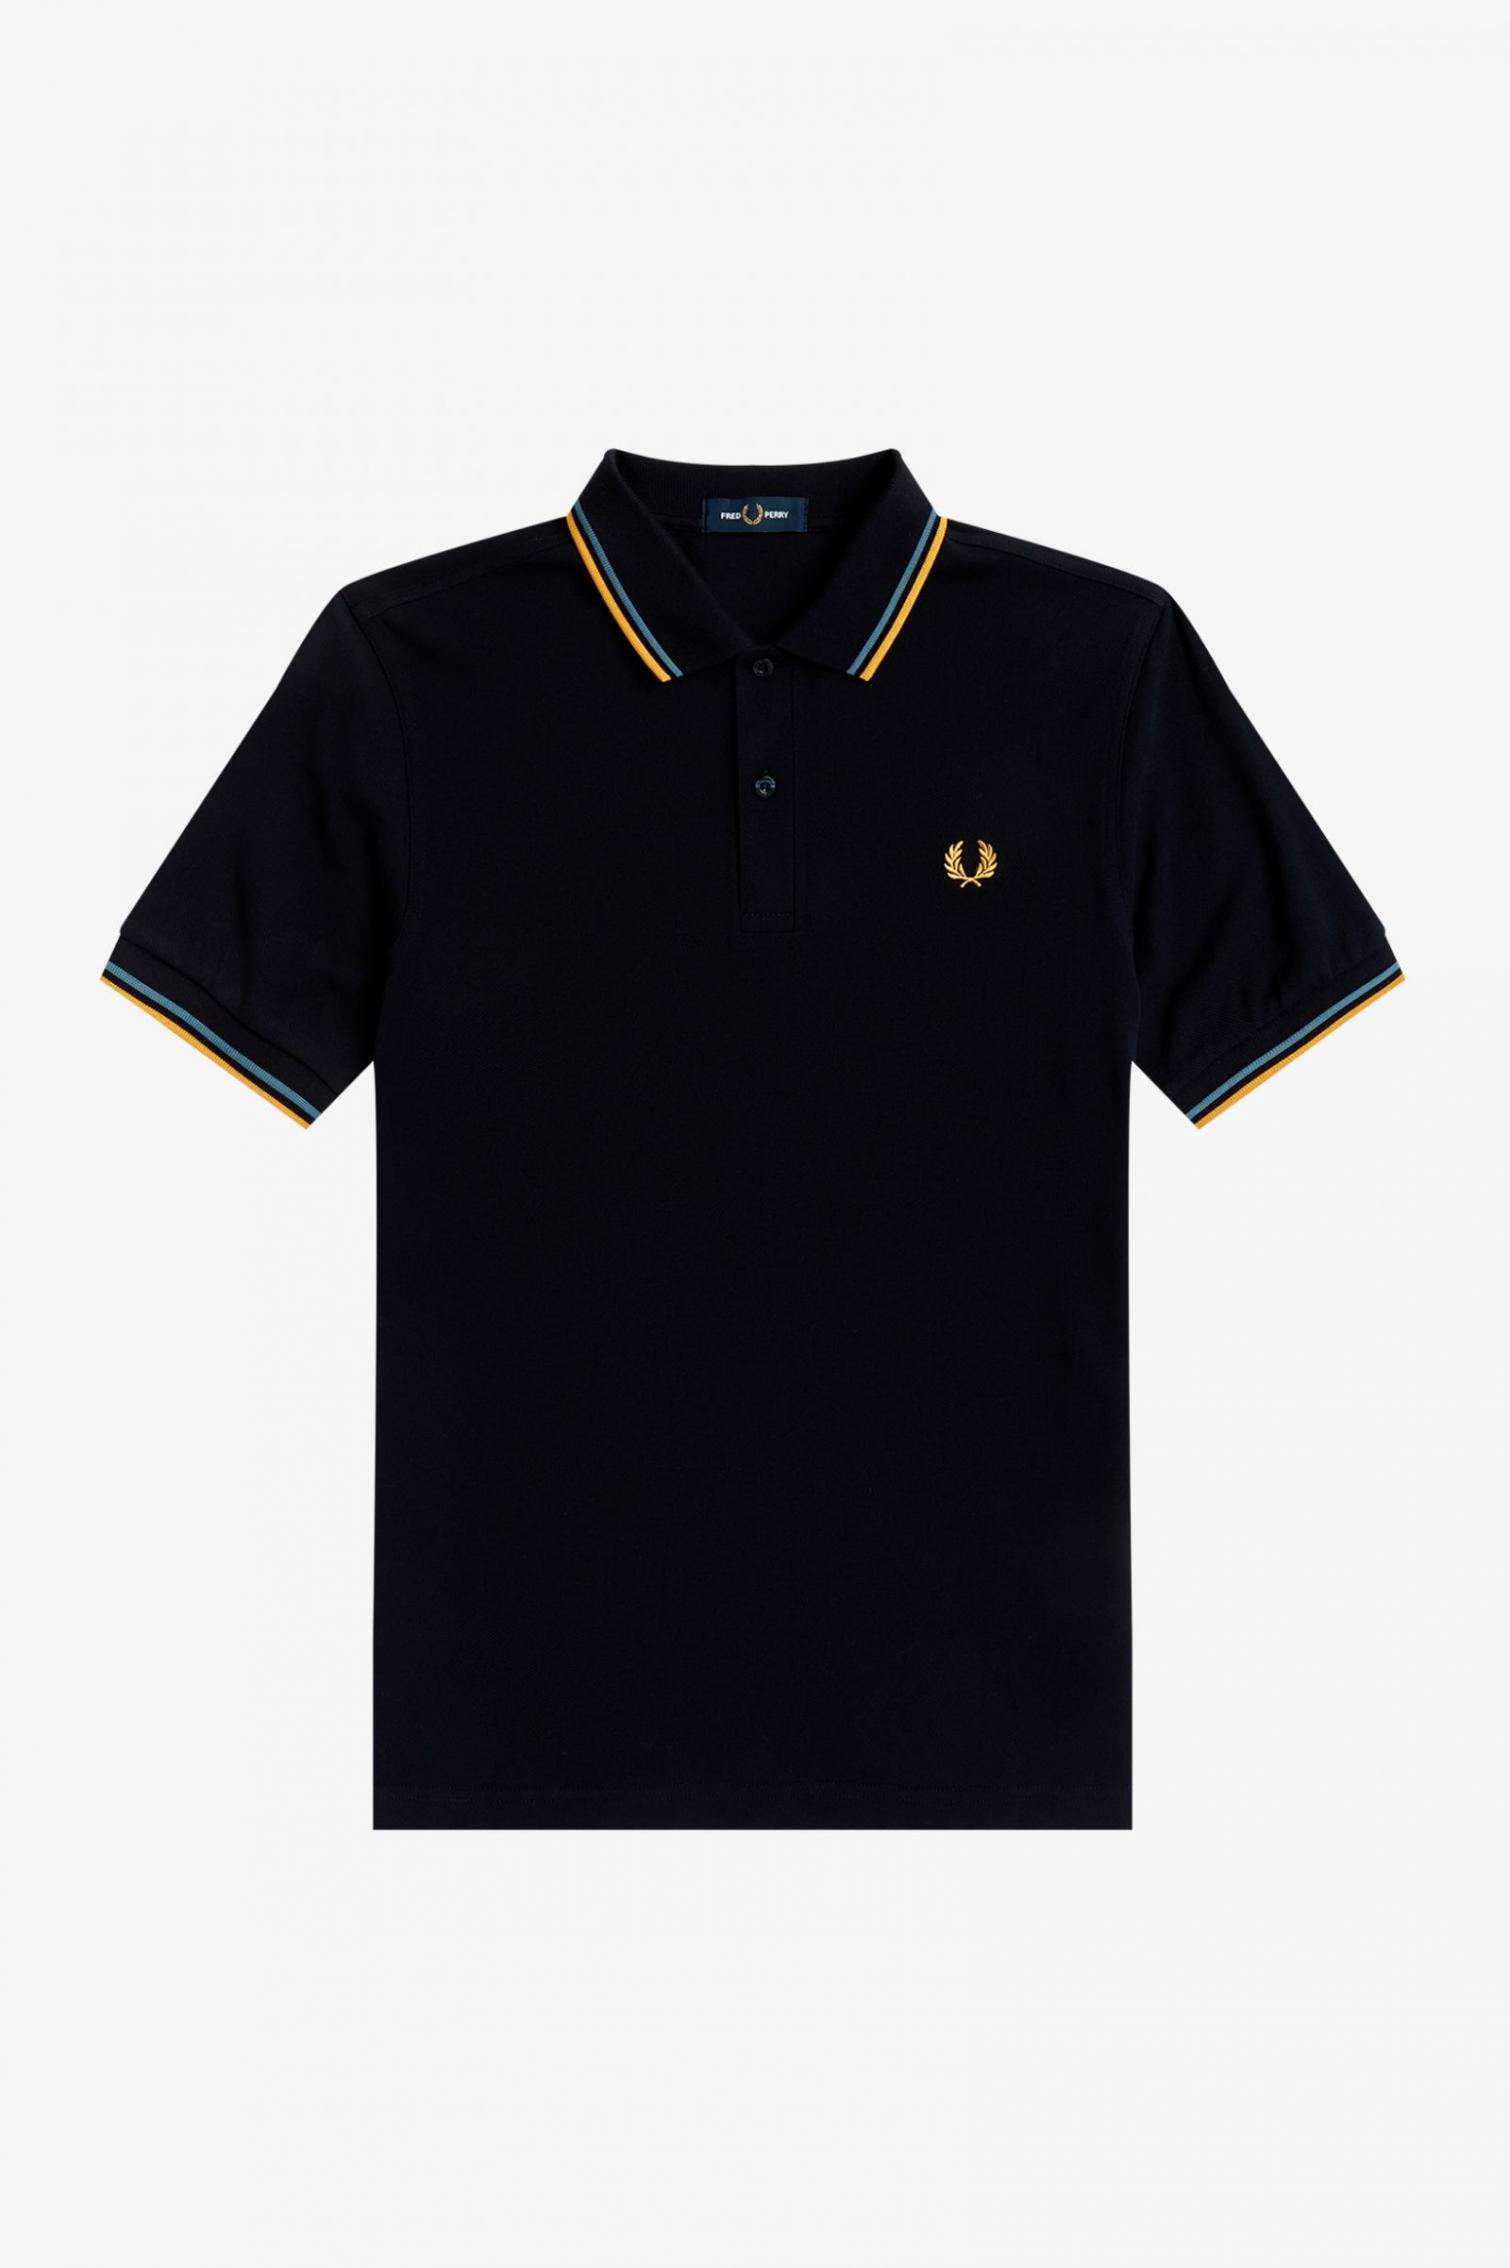 Vêtement Polos Fred Perry homme Twin Tipped Shirt Bleu marine Coton 